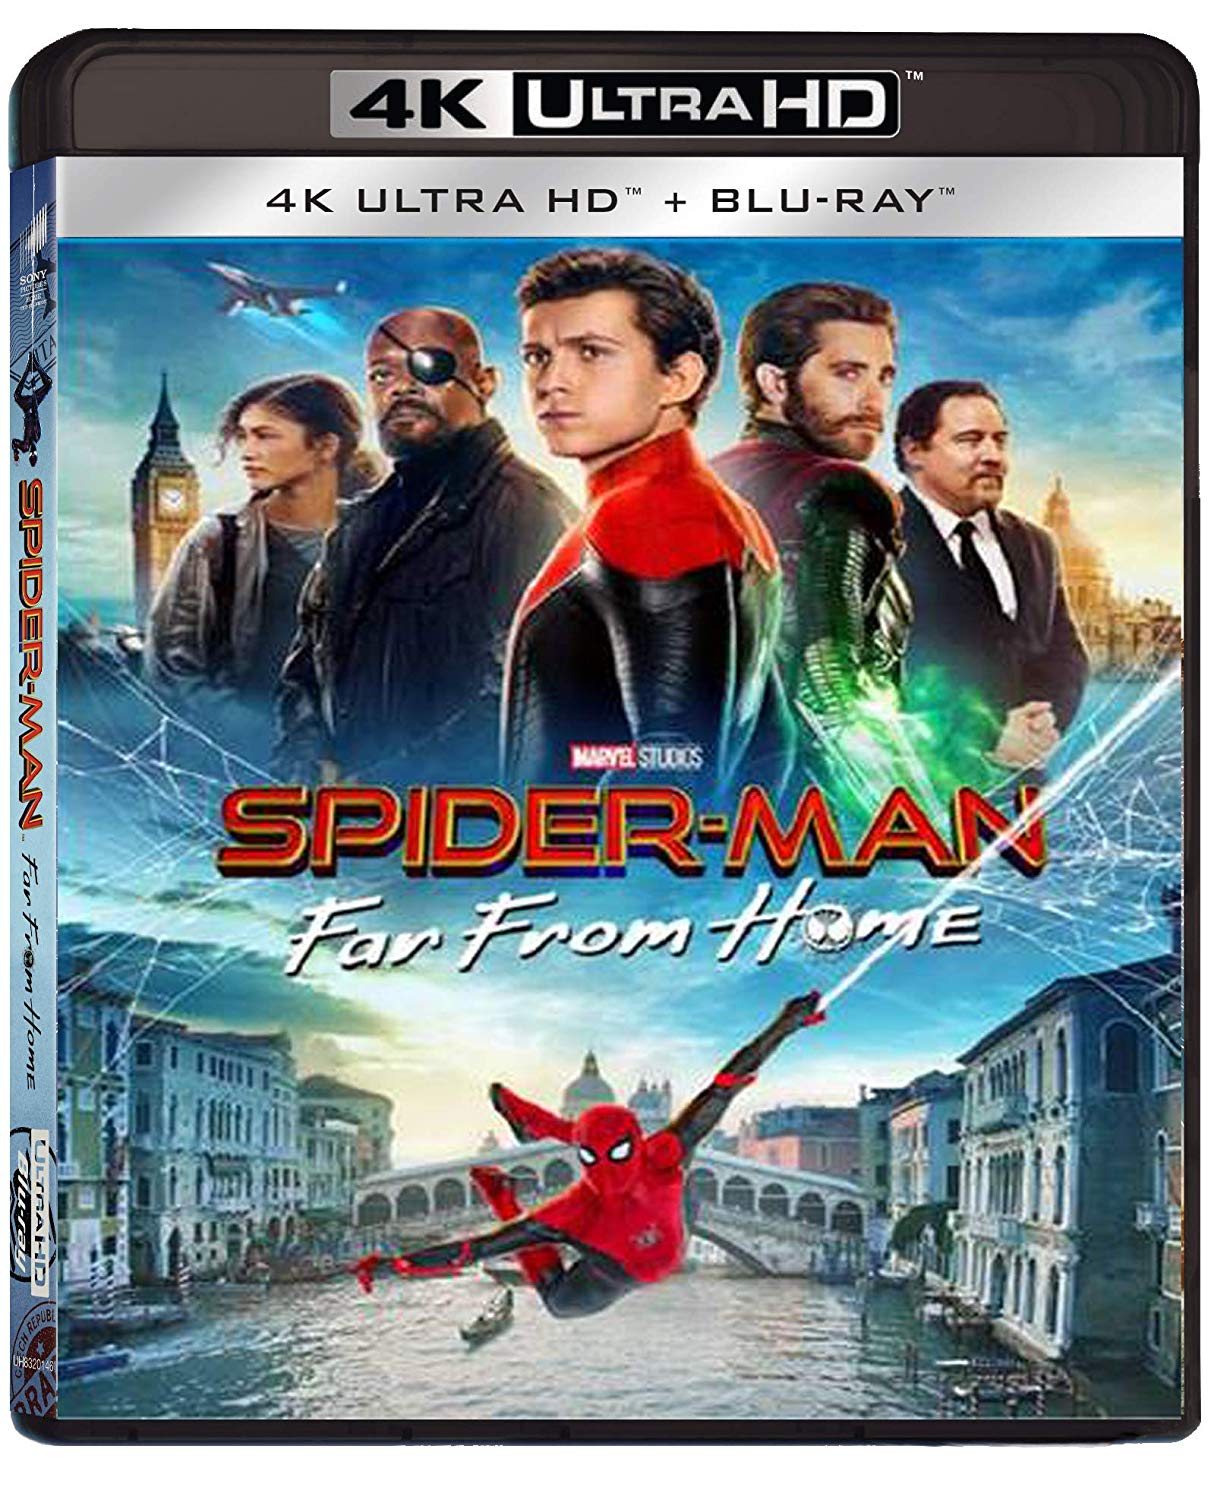 SPIDER-MAN: FAR FROM HOME (4K UHD+BLU-RAY)